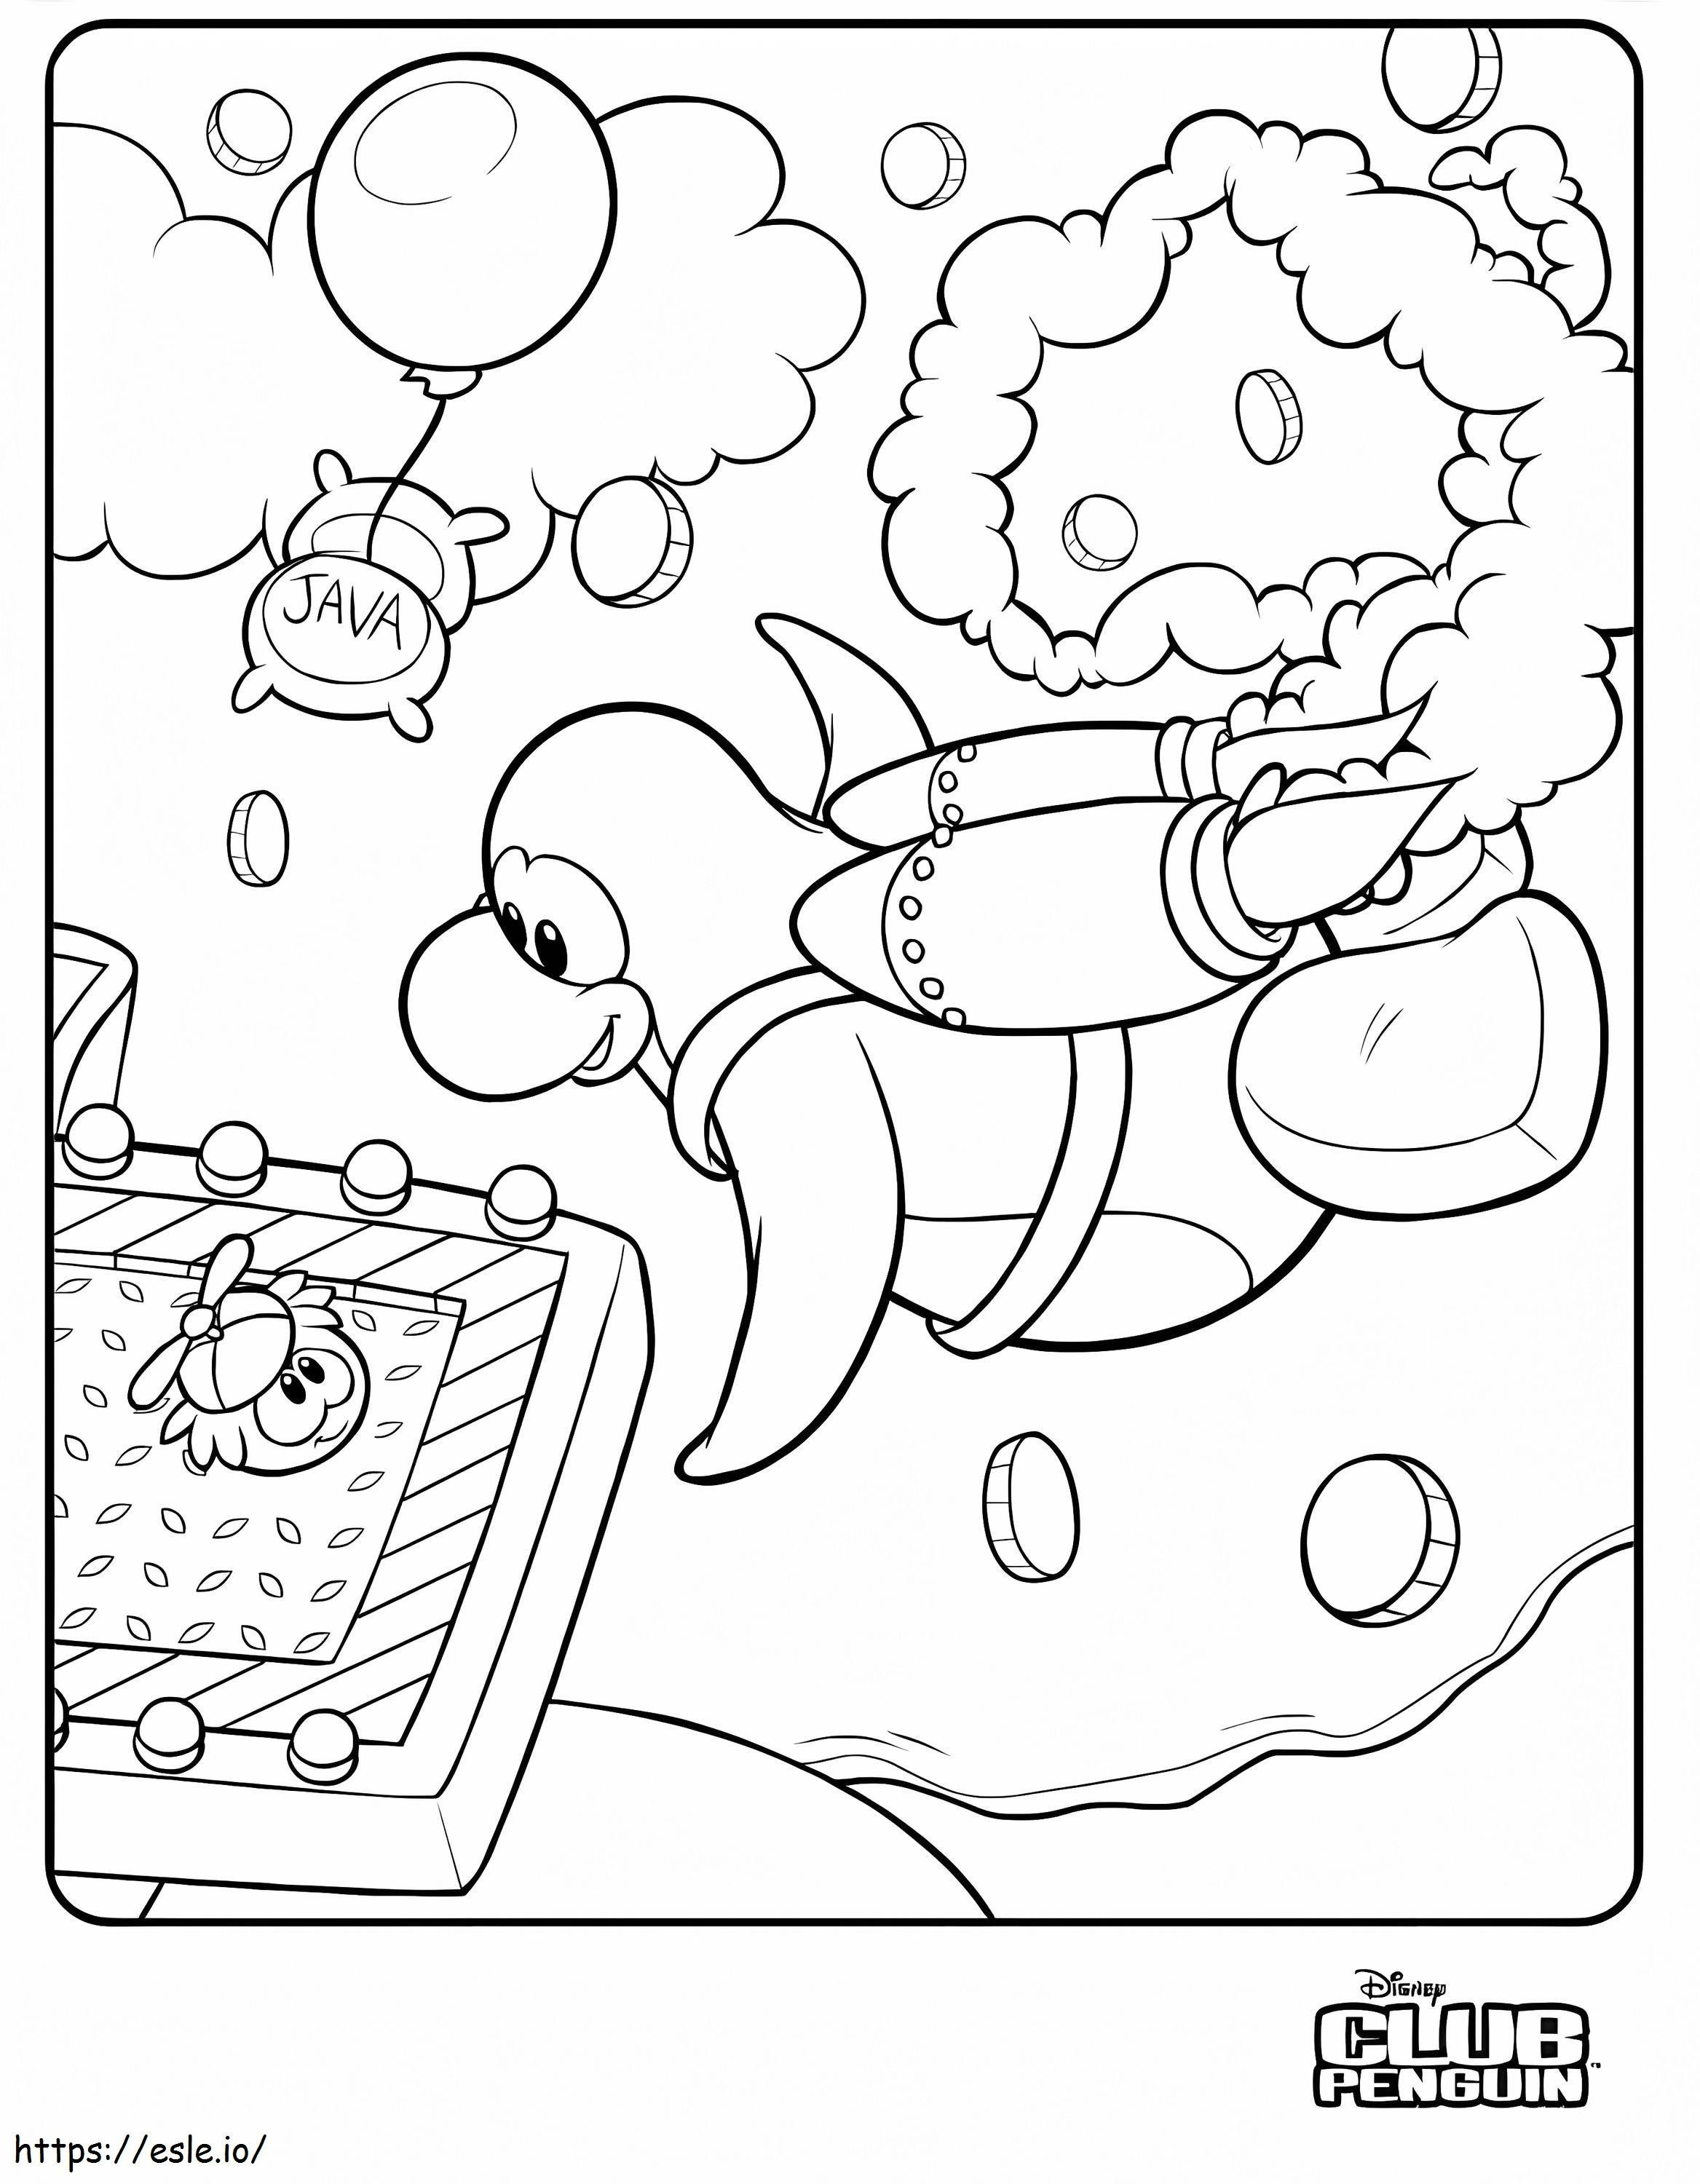 Club Penguin JetPack coloring page